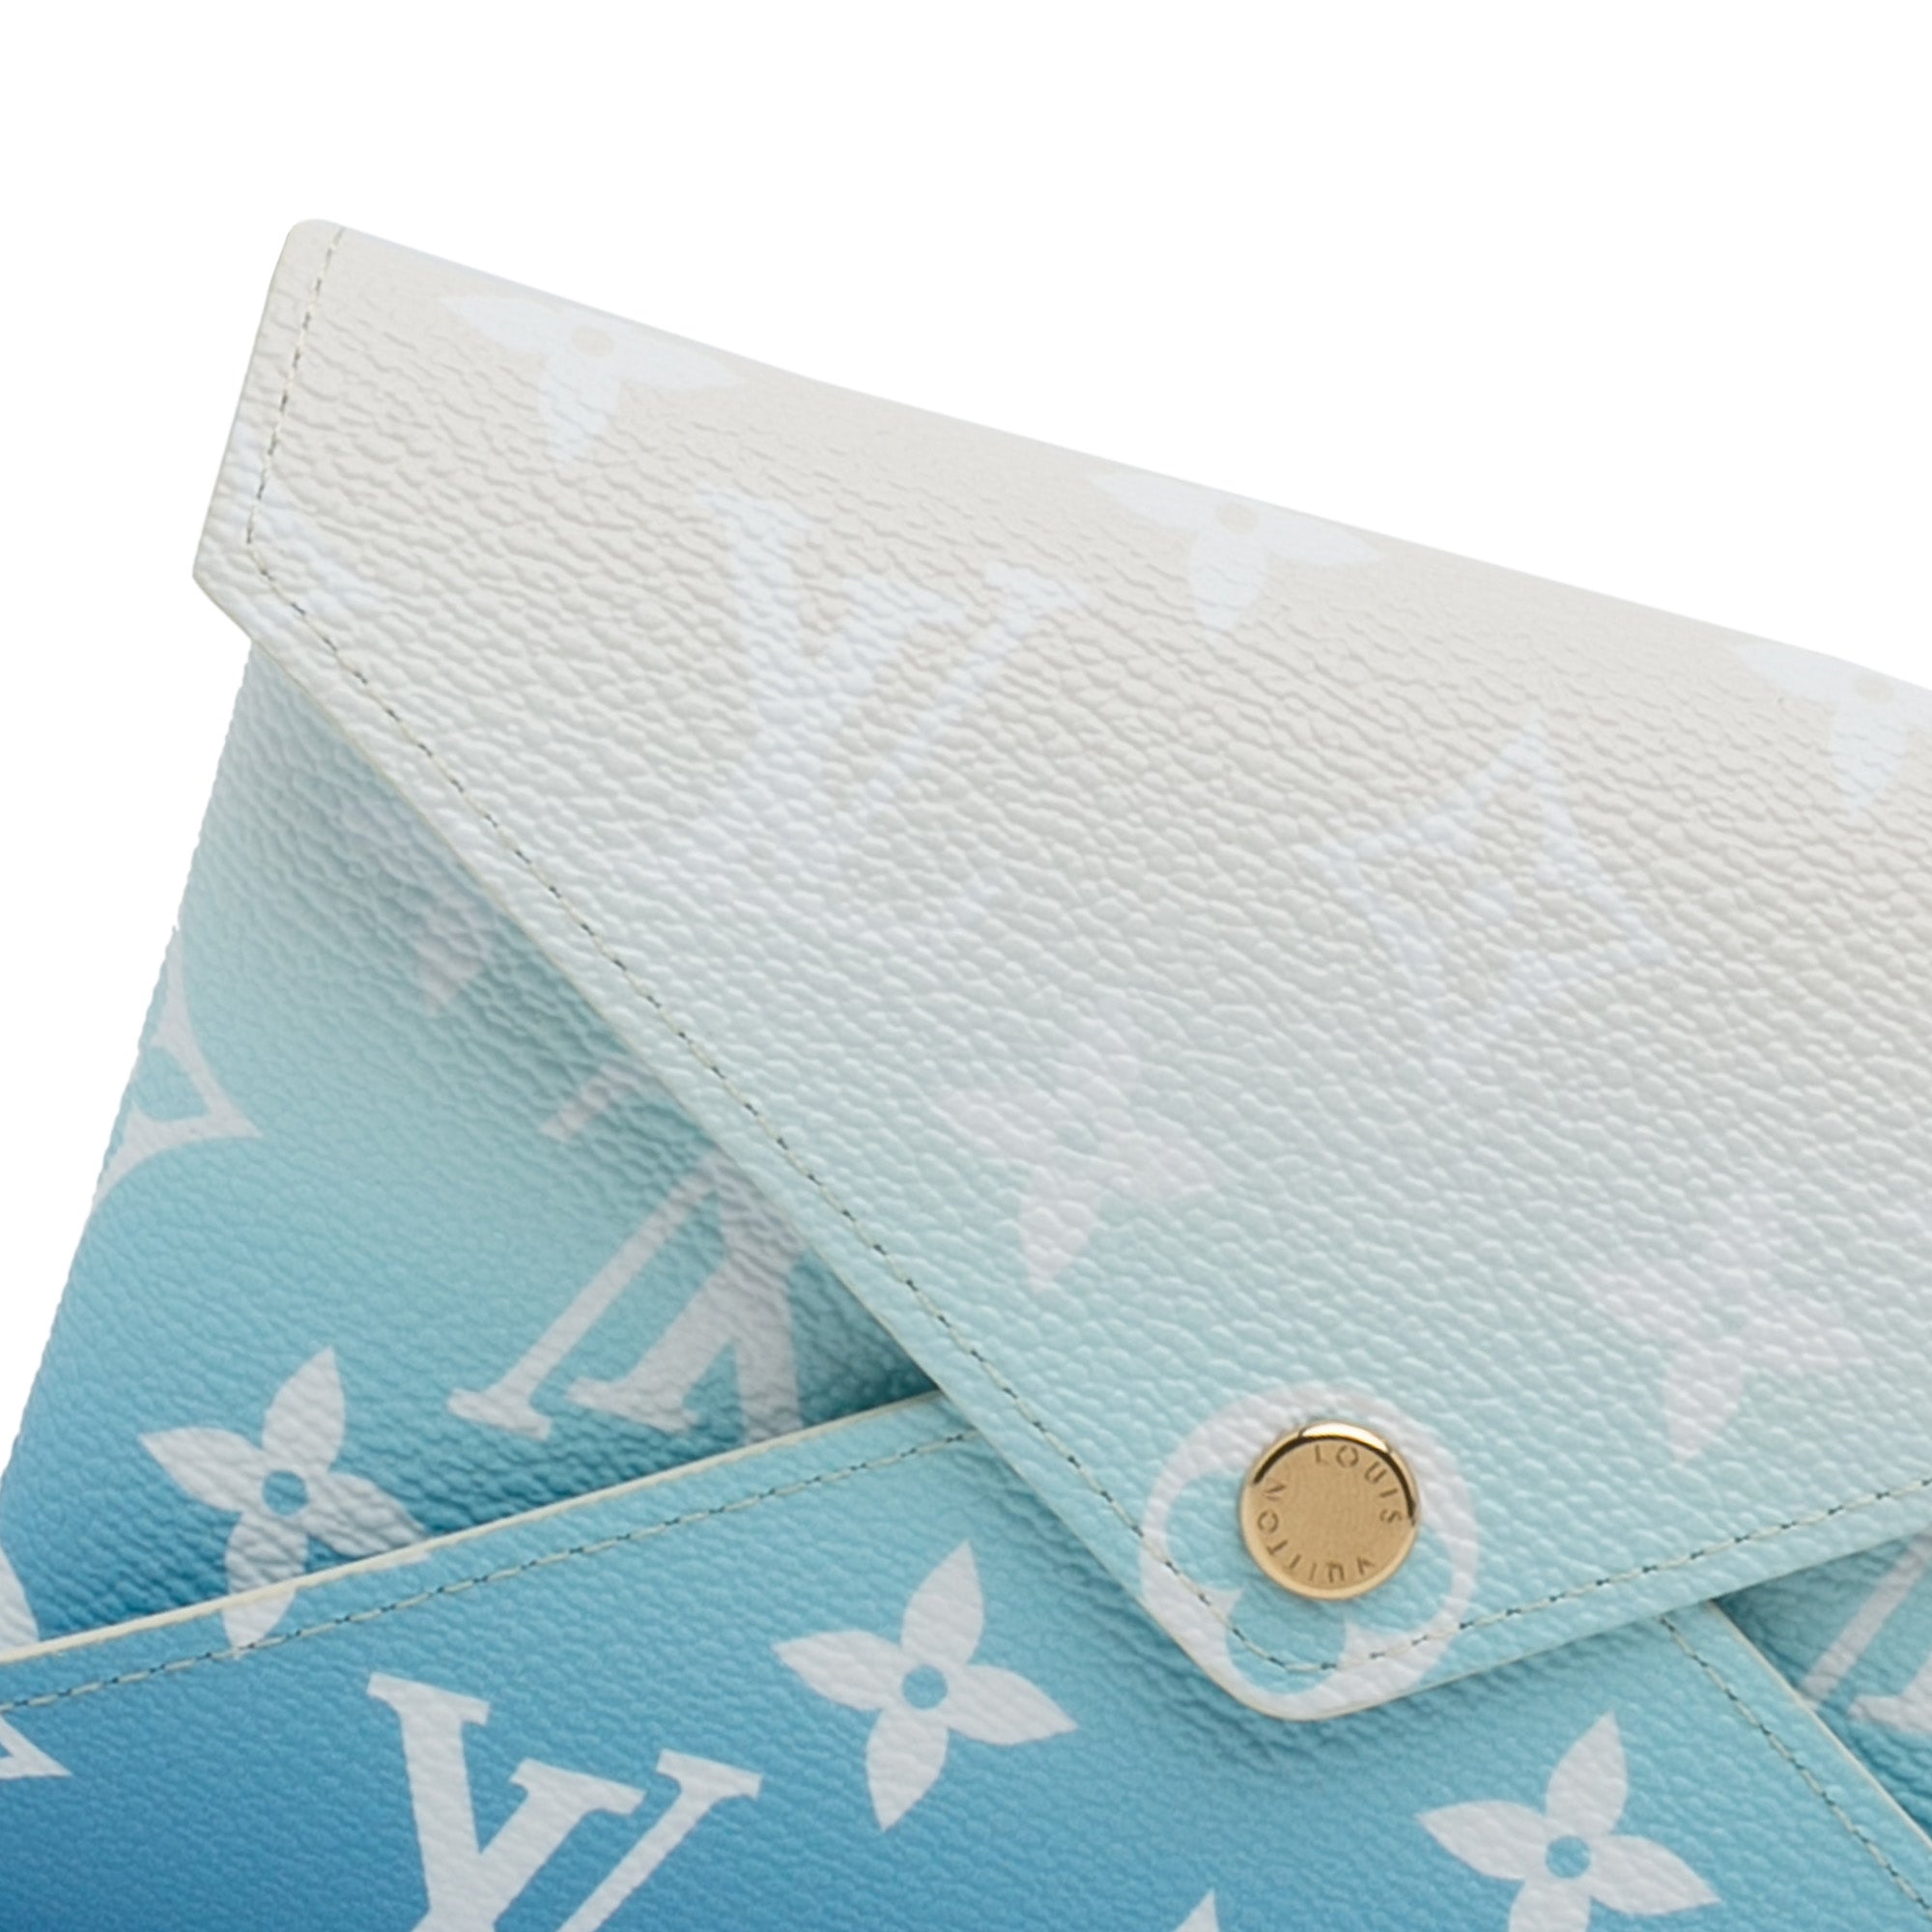 Louis Vuitton Peach Mist Monogram By The Pool Kirigami Envelope Pouch PM  Small 796lv